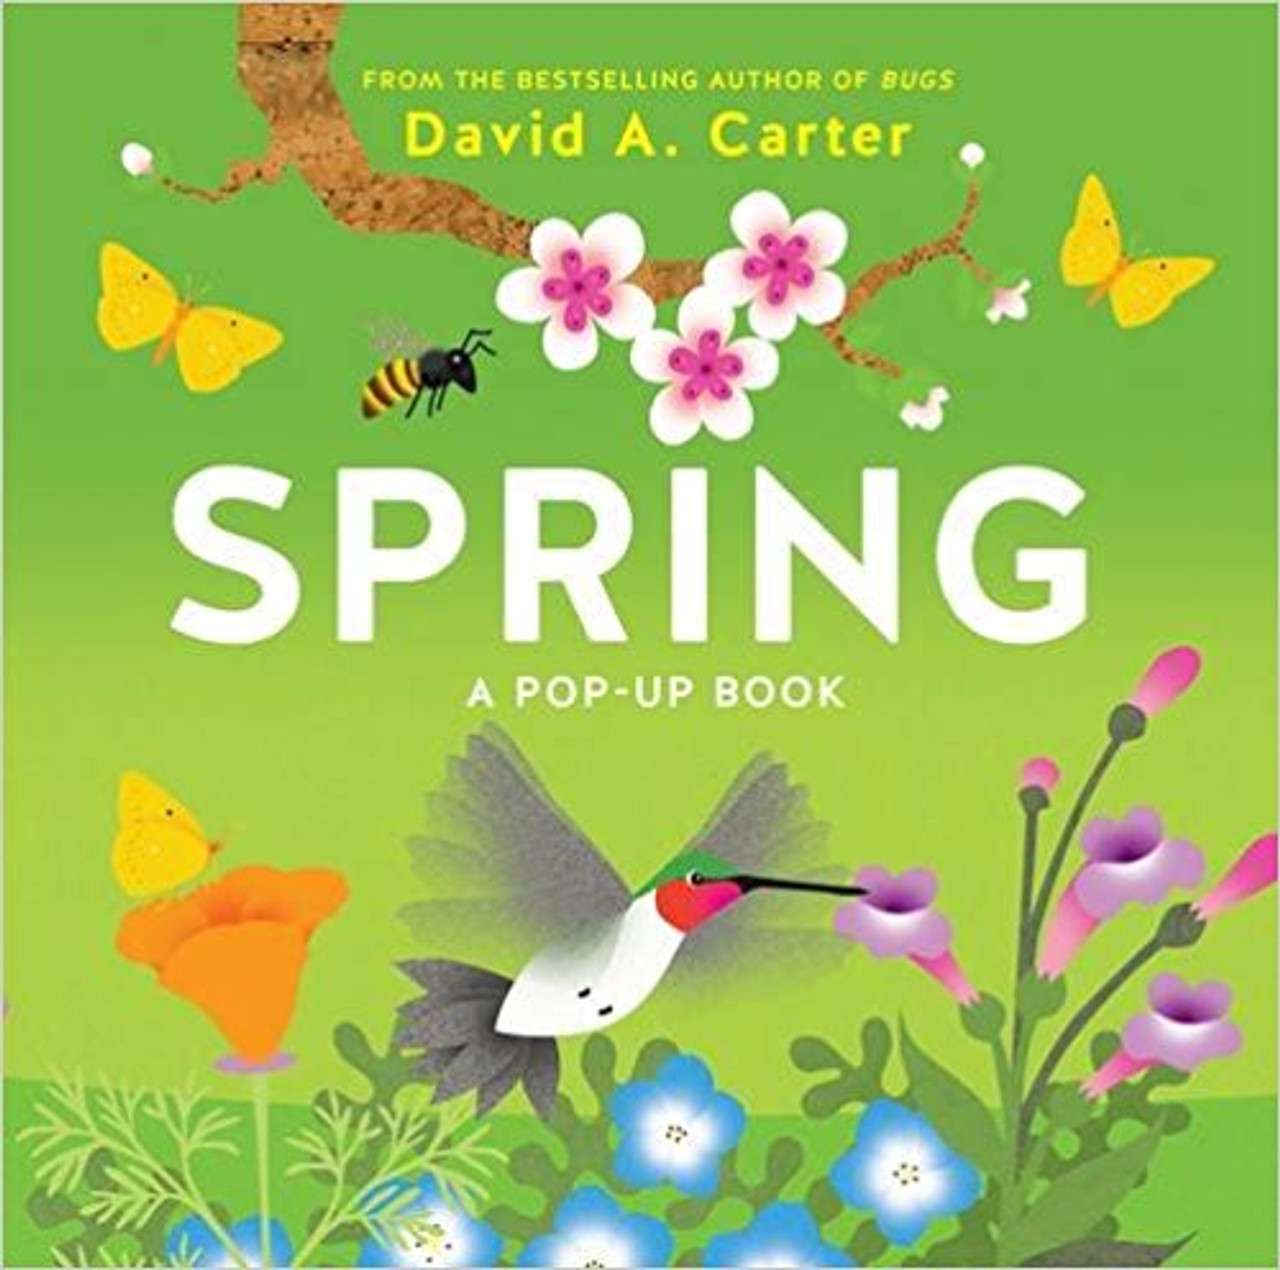 <p>Just in time for spring, this is the second book in the Carter pop-up book series about the seasons. Each spread has a very brief verse and depicts common springtime flora and fauna. All things pictured are labeled (robins, water lilies, deer and fawns, cherry trees, etc.). The text is simple for very young readers to understand and enjoy.&nbsp;</p>